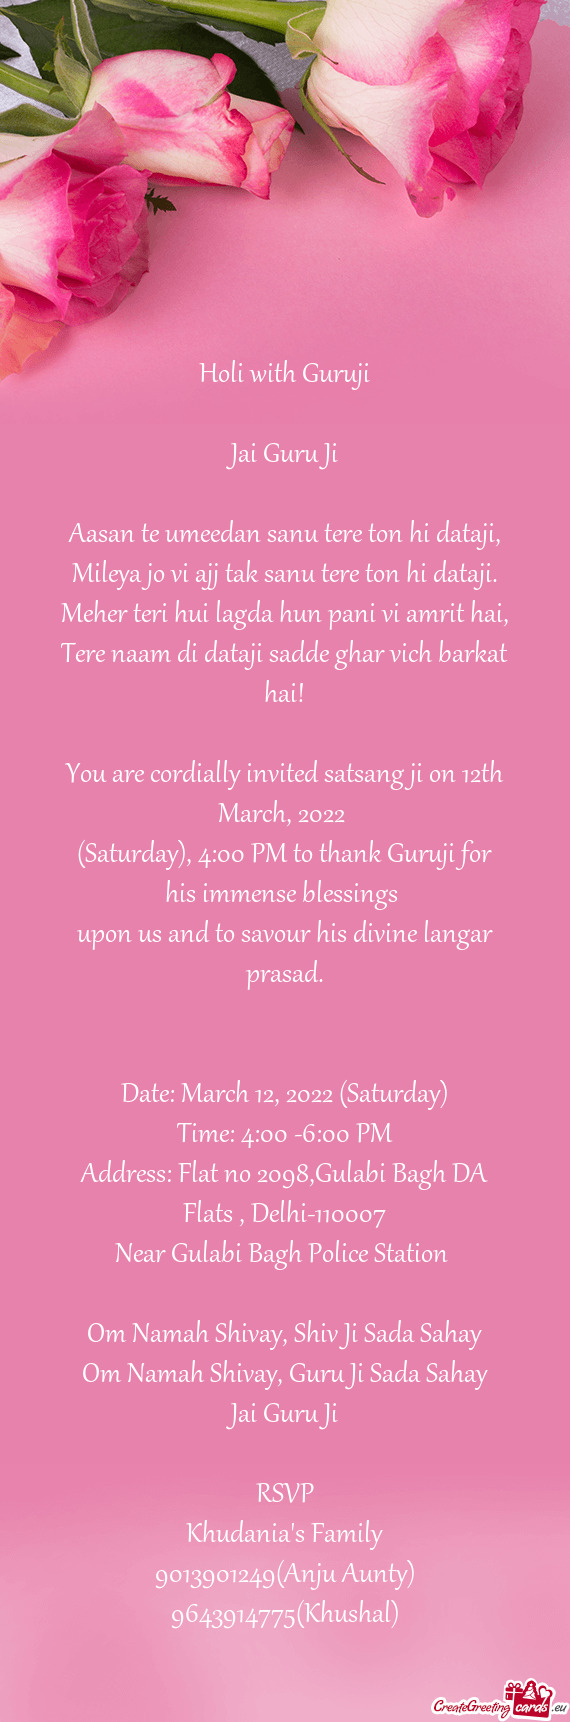 You are cordially invited satsang ji on 12th March, 2022